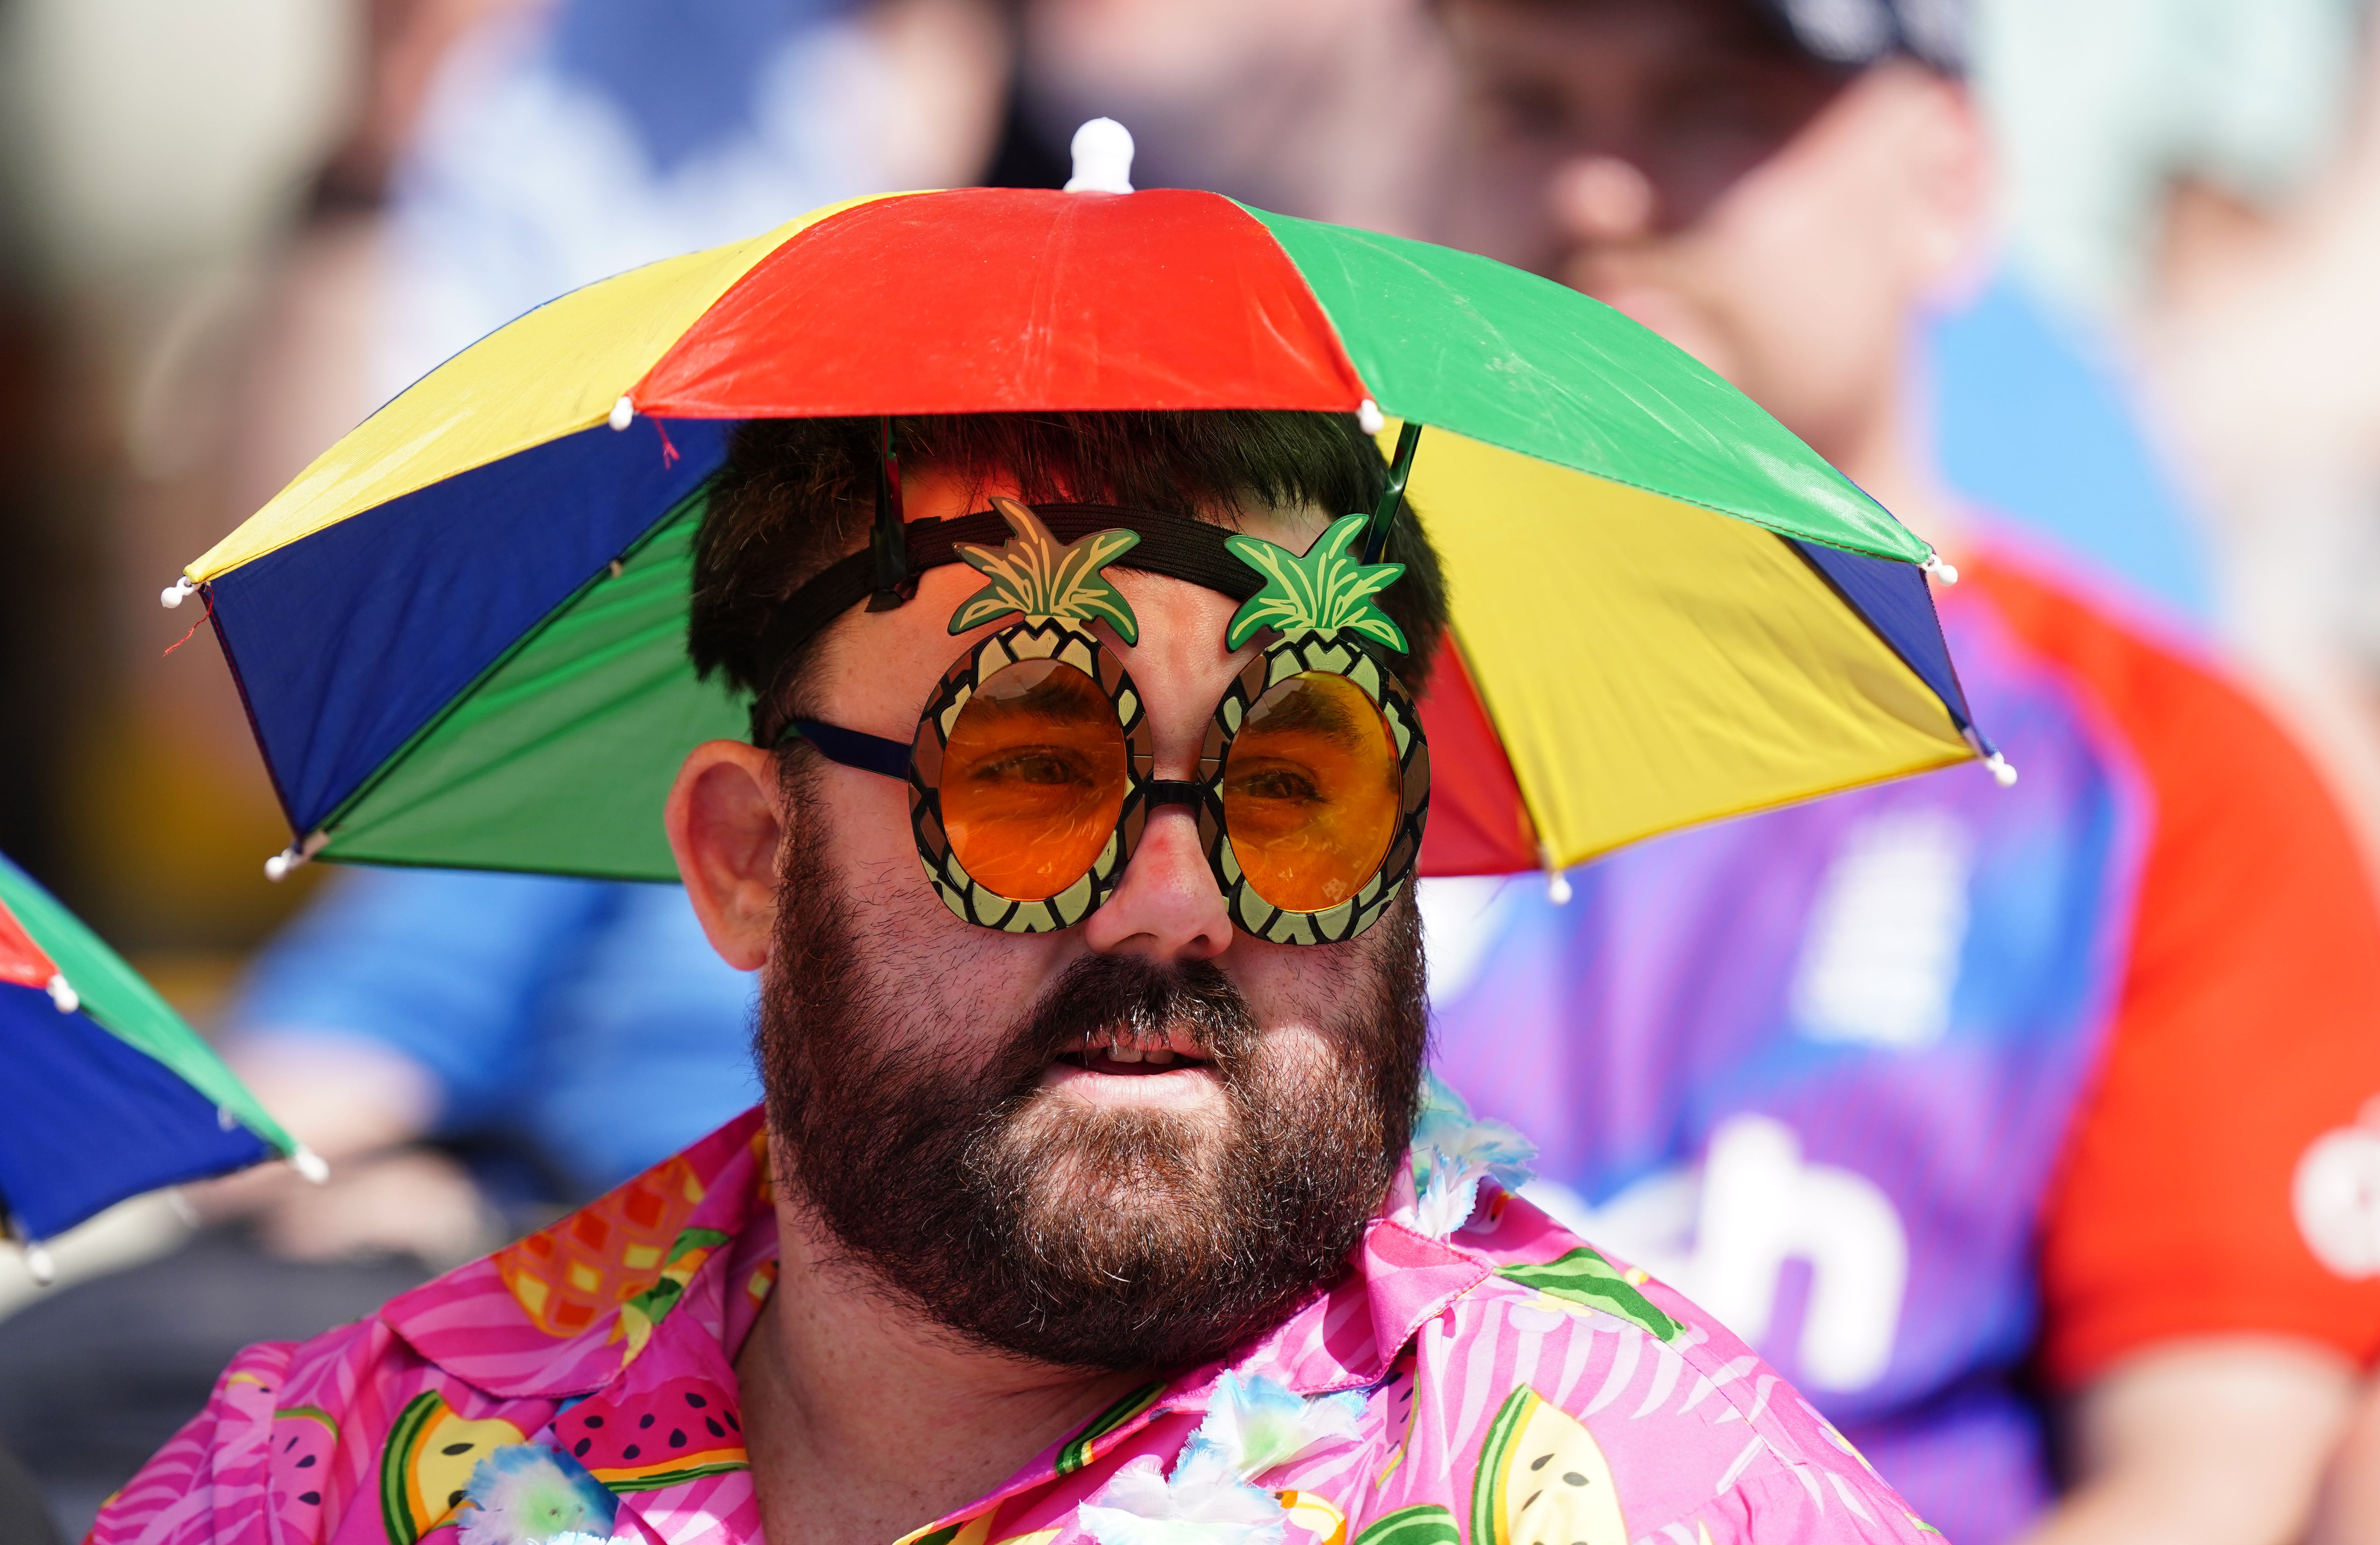 A fan keeps cool with a colourful hat during the Vitality Blast T20 cricket semi-final match at Edgbaston Stadium (Mike Egerton/PA)